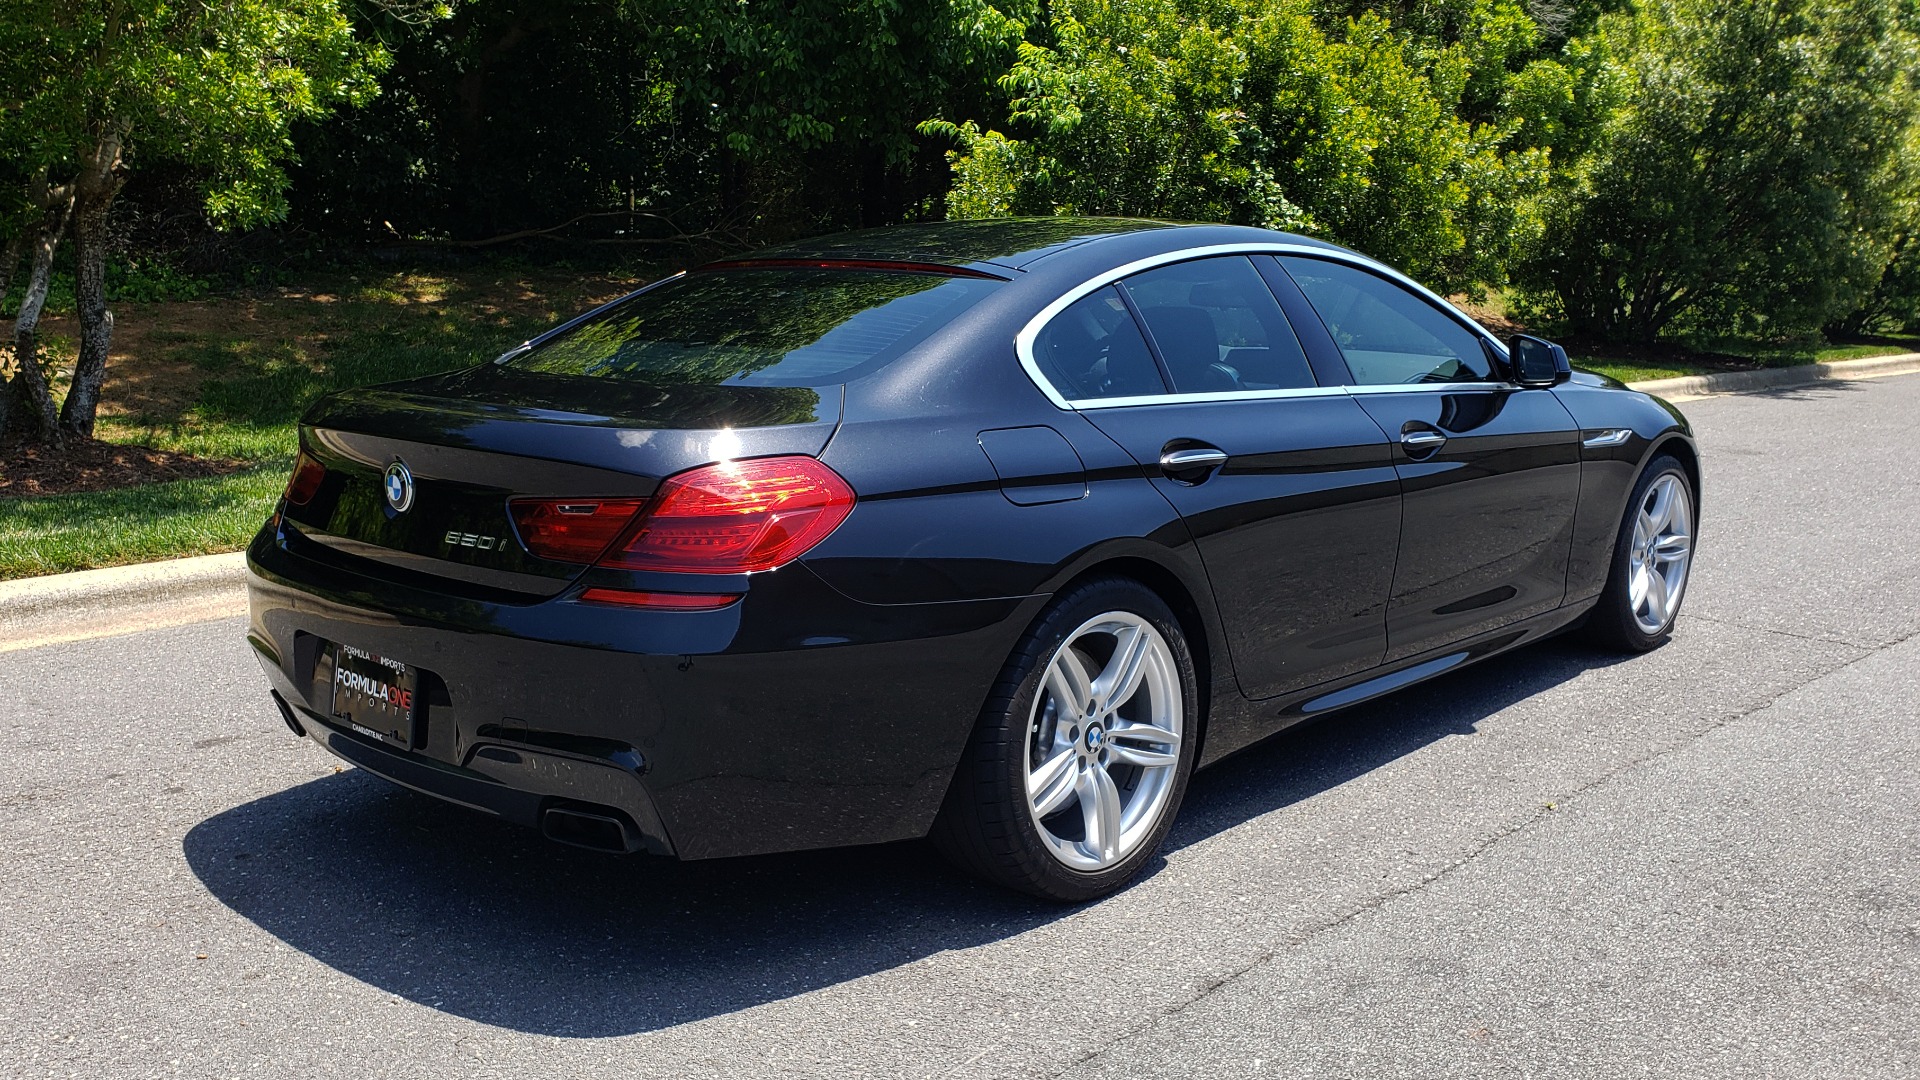 Used 2013 BMW 6 SERIES 650I GRANCOUPE / M-SPORT / LUXURY / NAV / SUNROOF / HTD STS for sale Sold at Formula Imports in Charlotte NC 28227 8